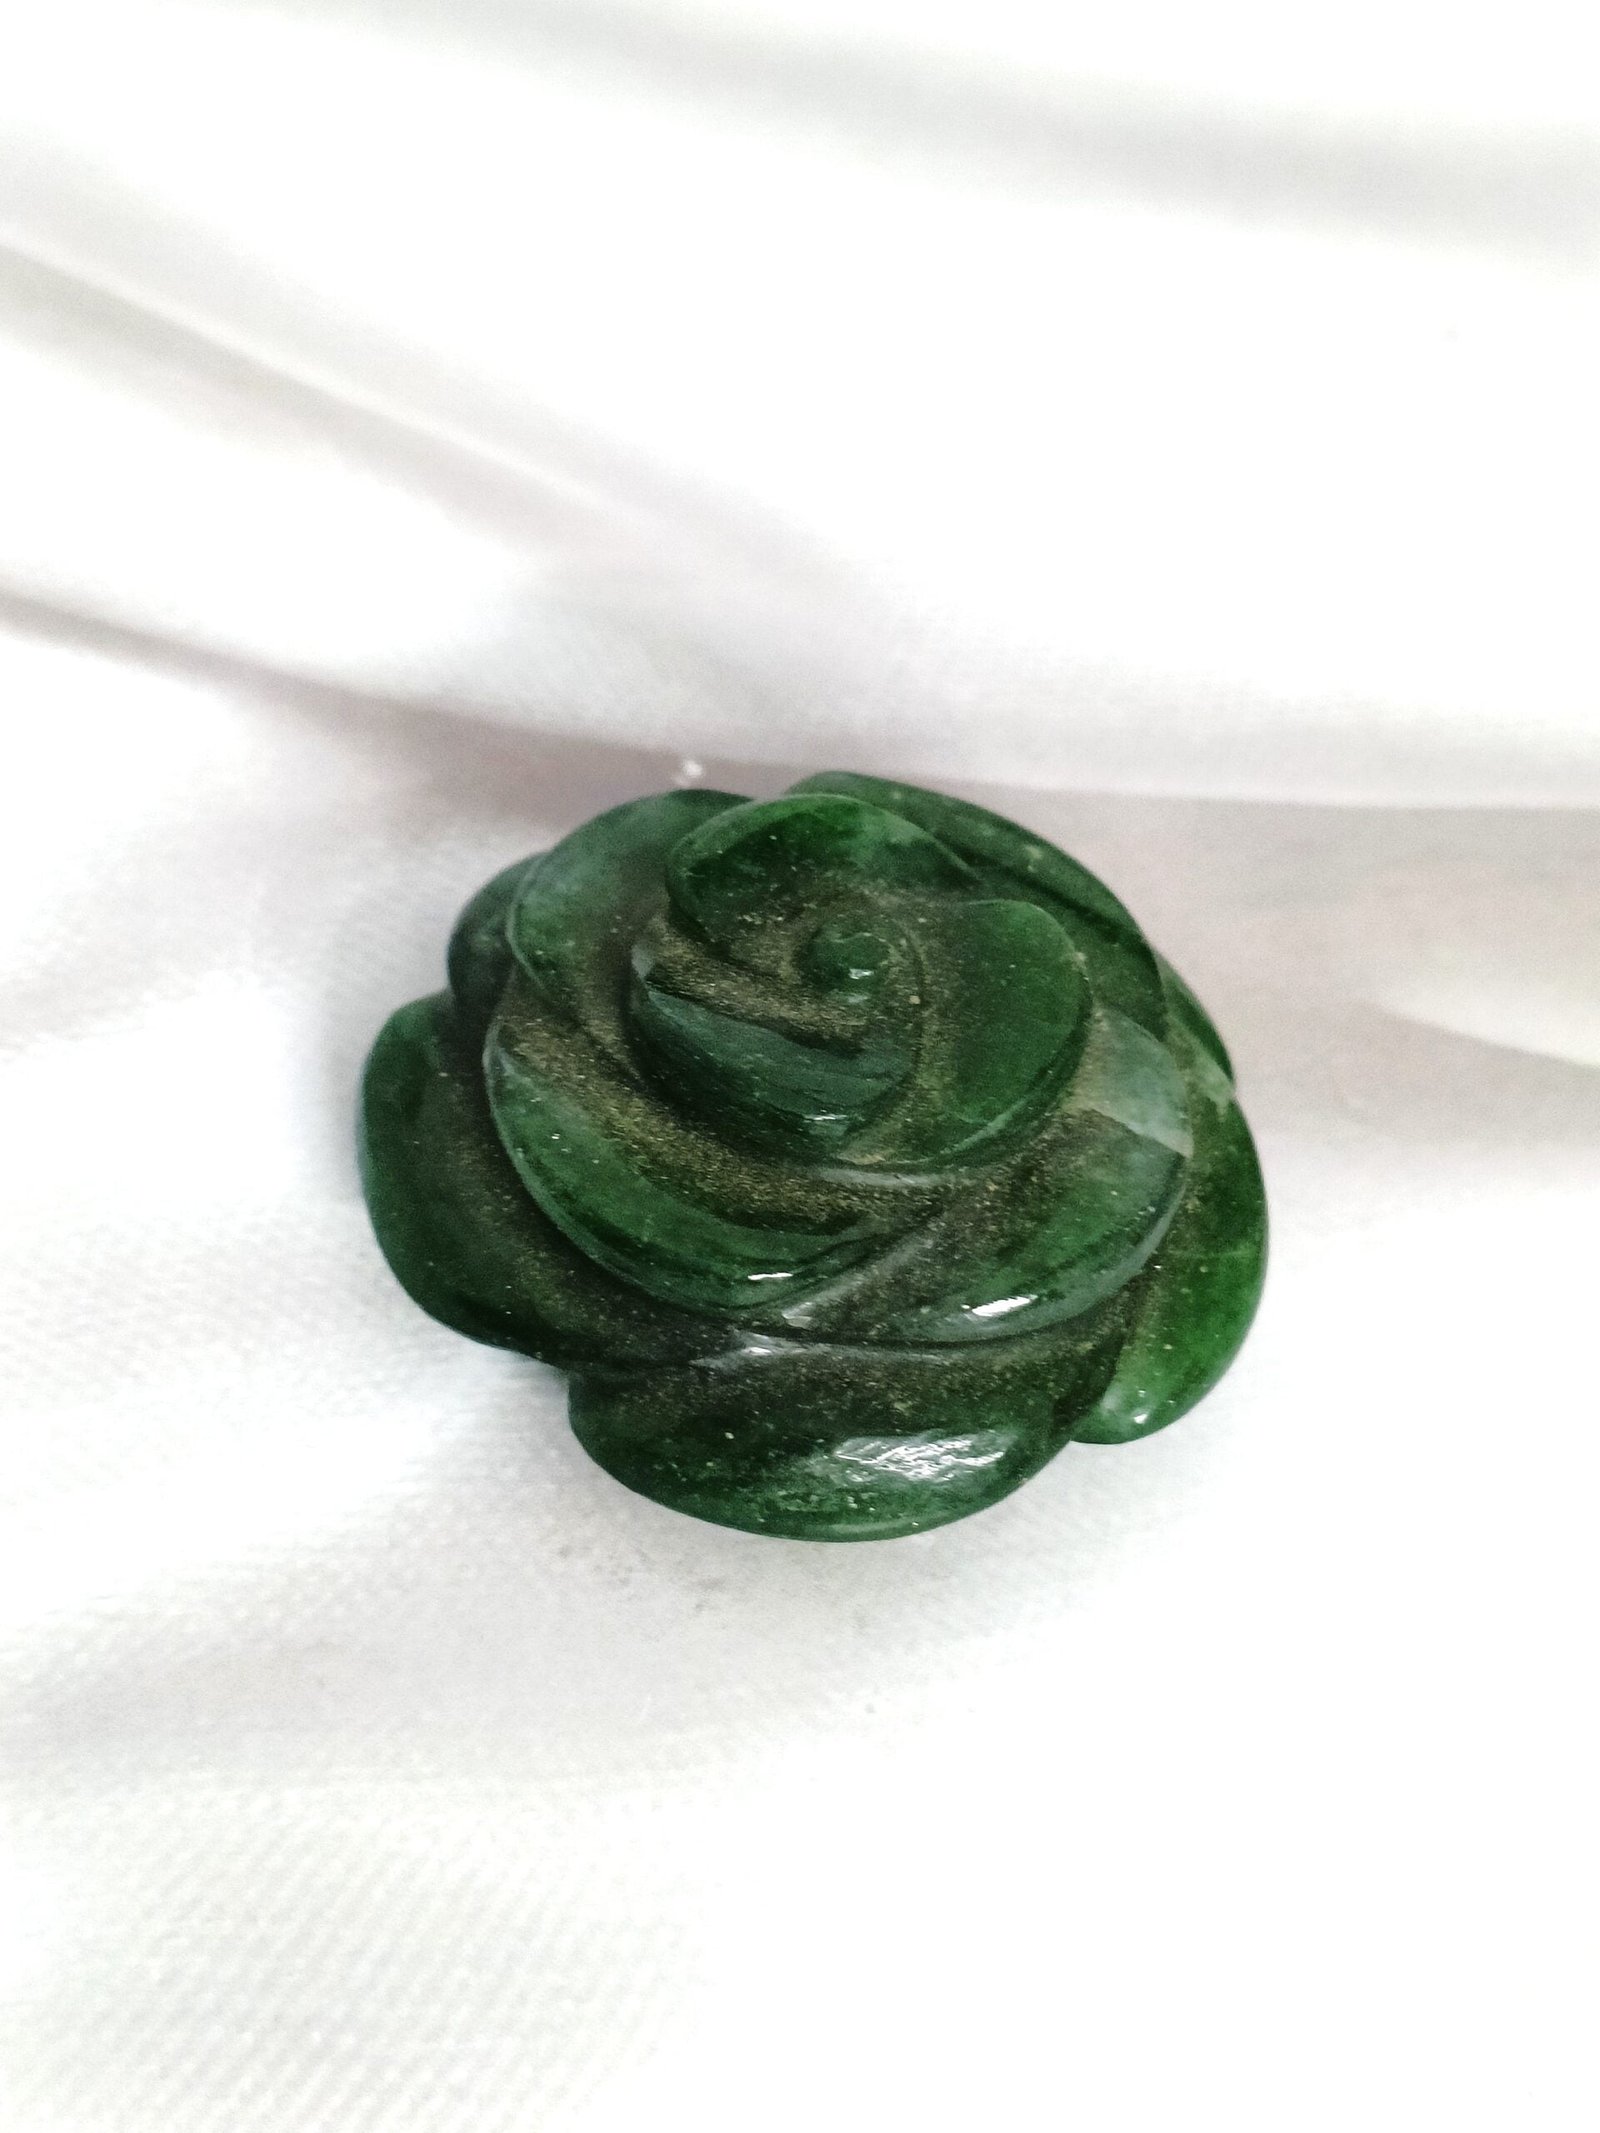 Green Jade Floral Figurine-2 inch for Good Luck, Love, Prosperity